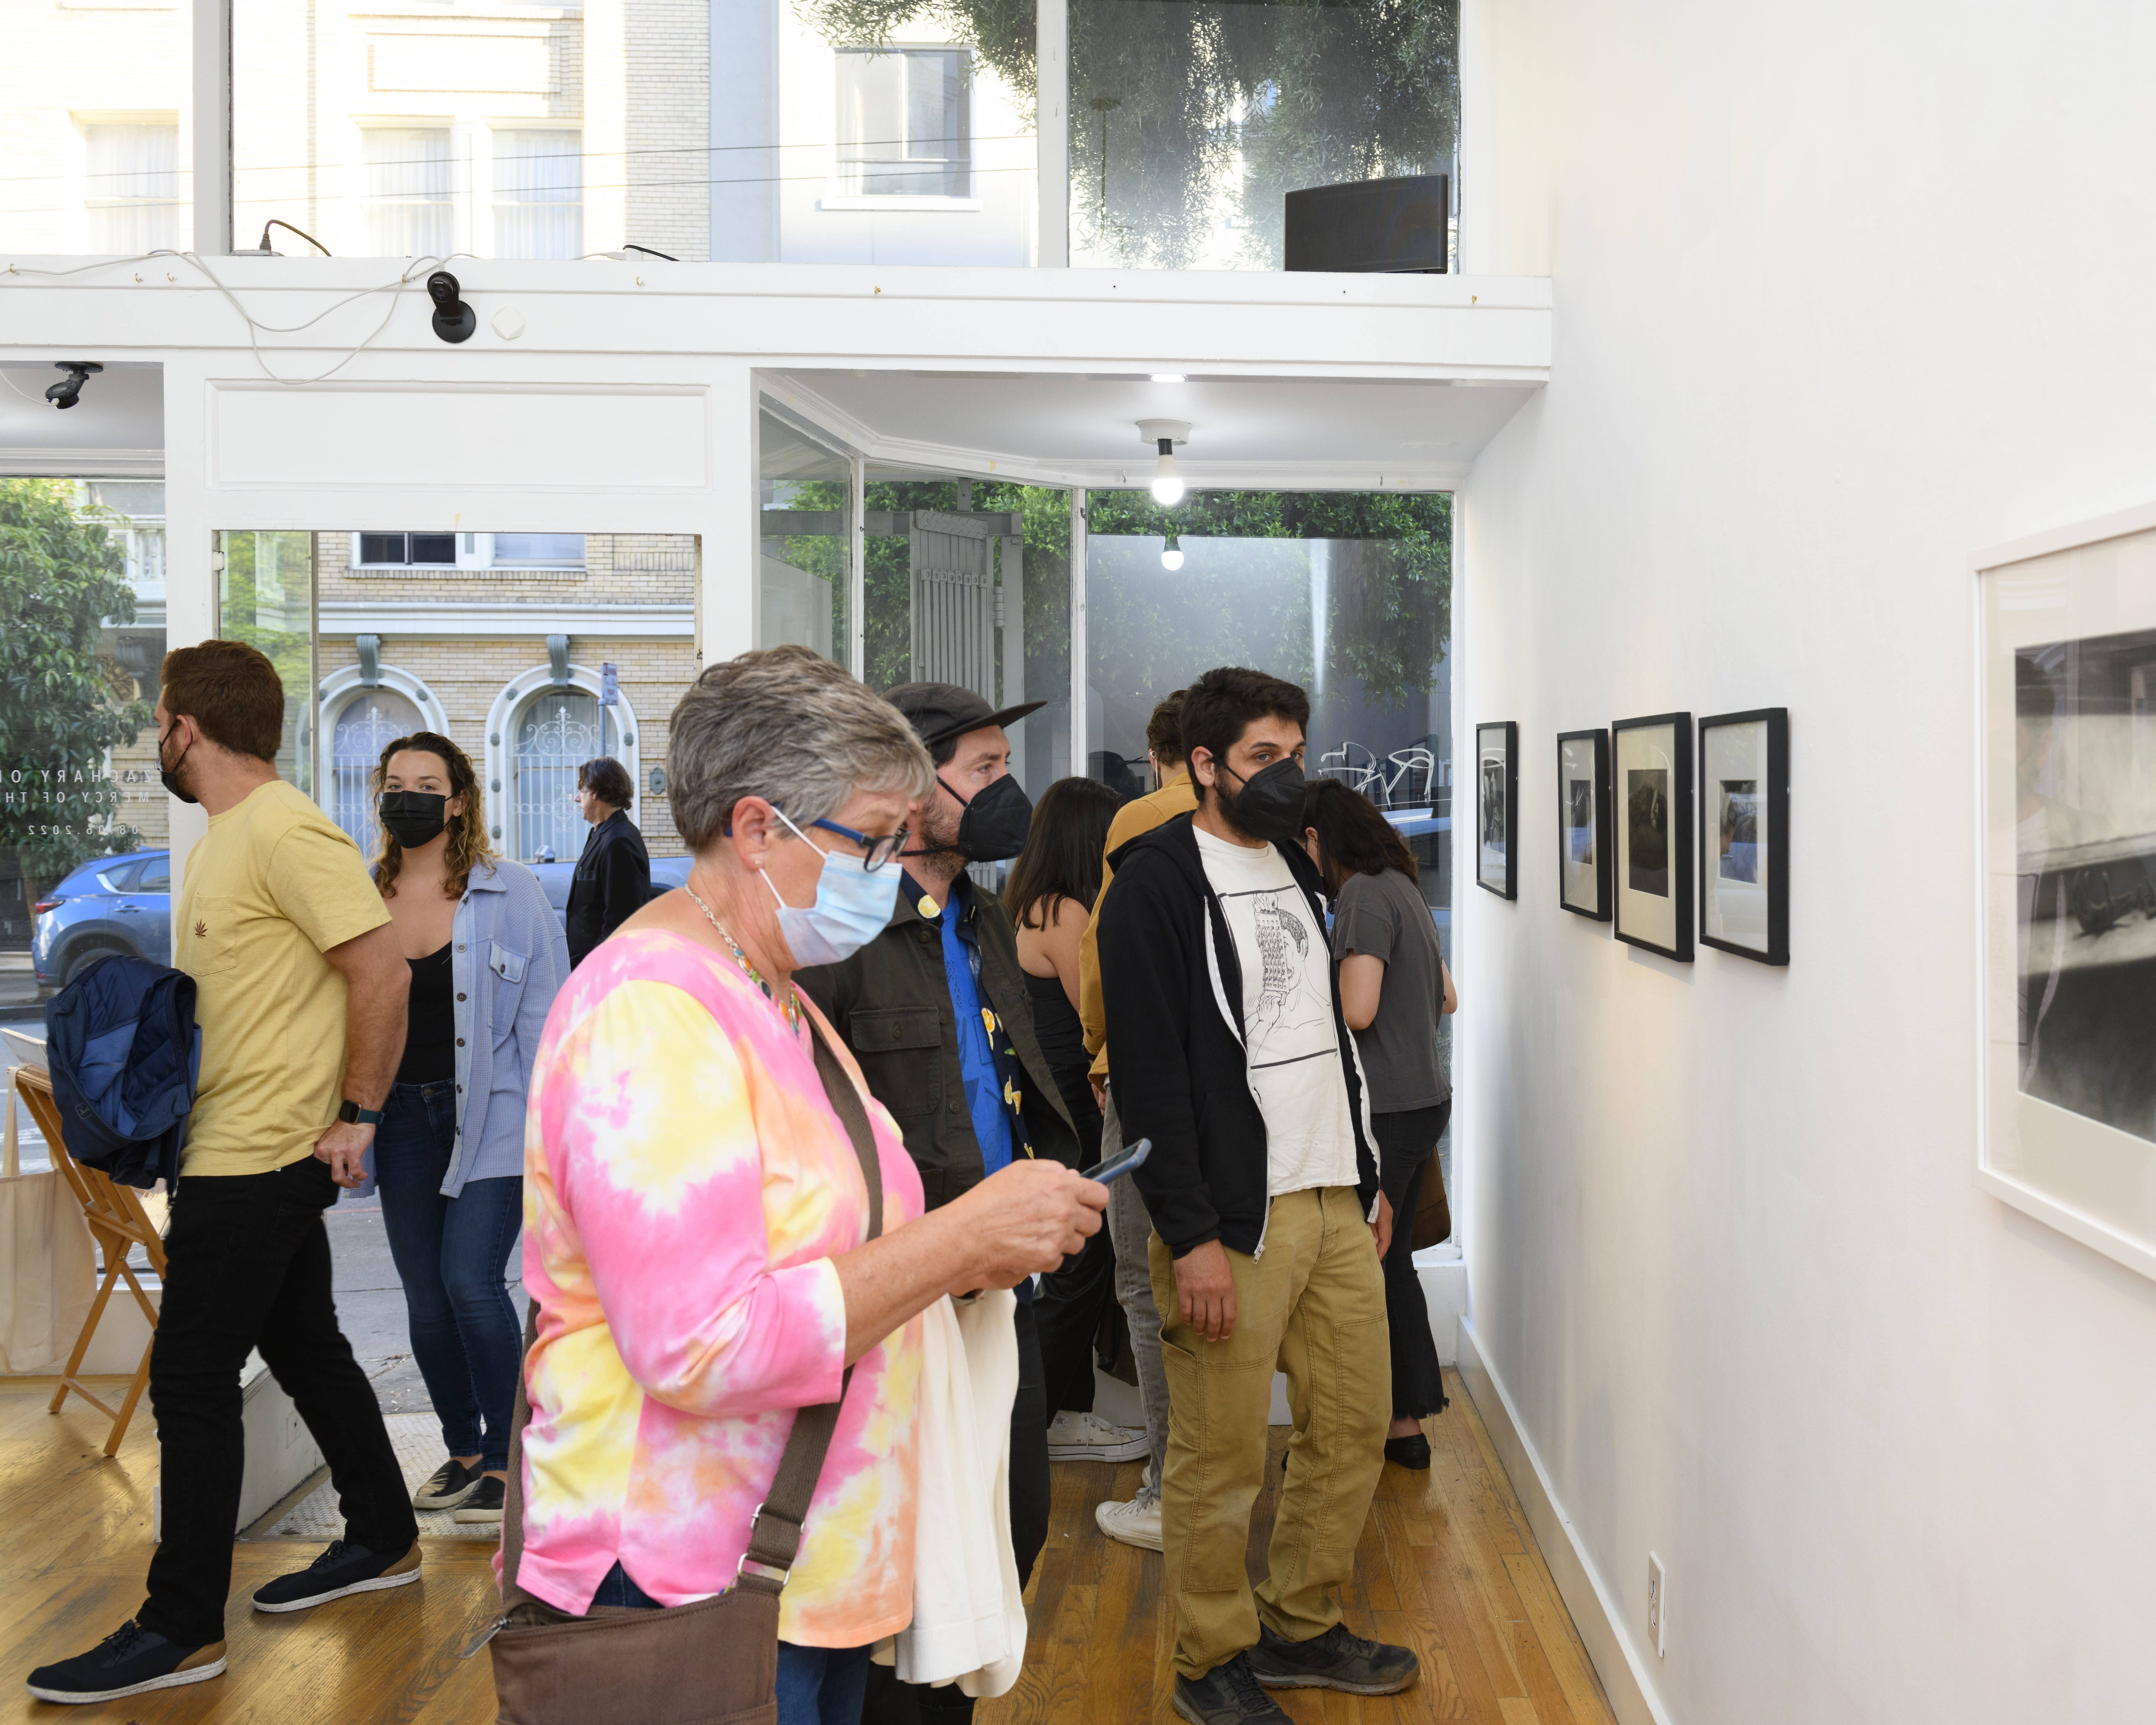 People attending the Zach Oldenkamp exhibition